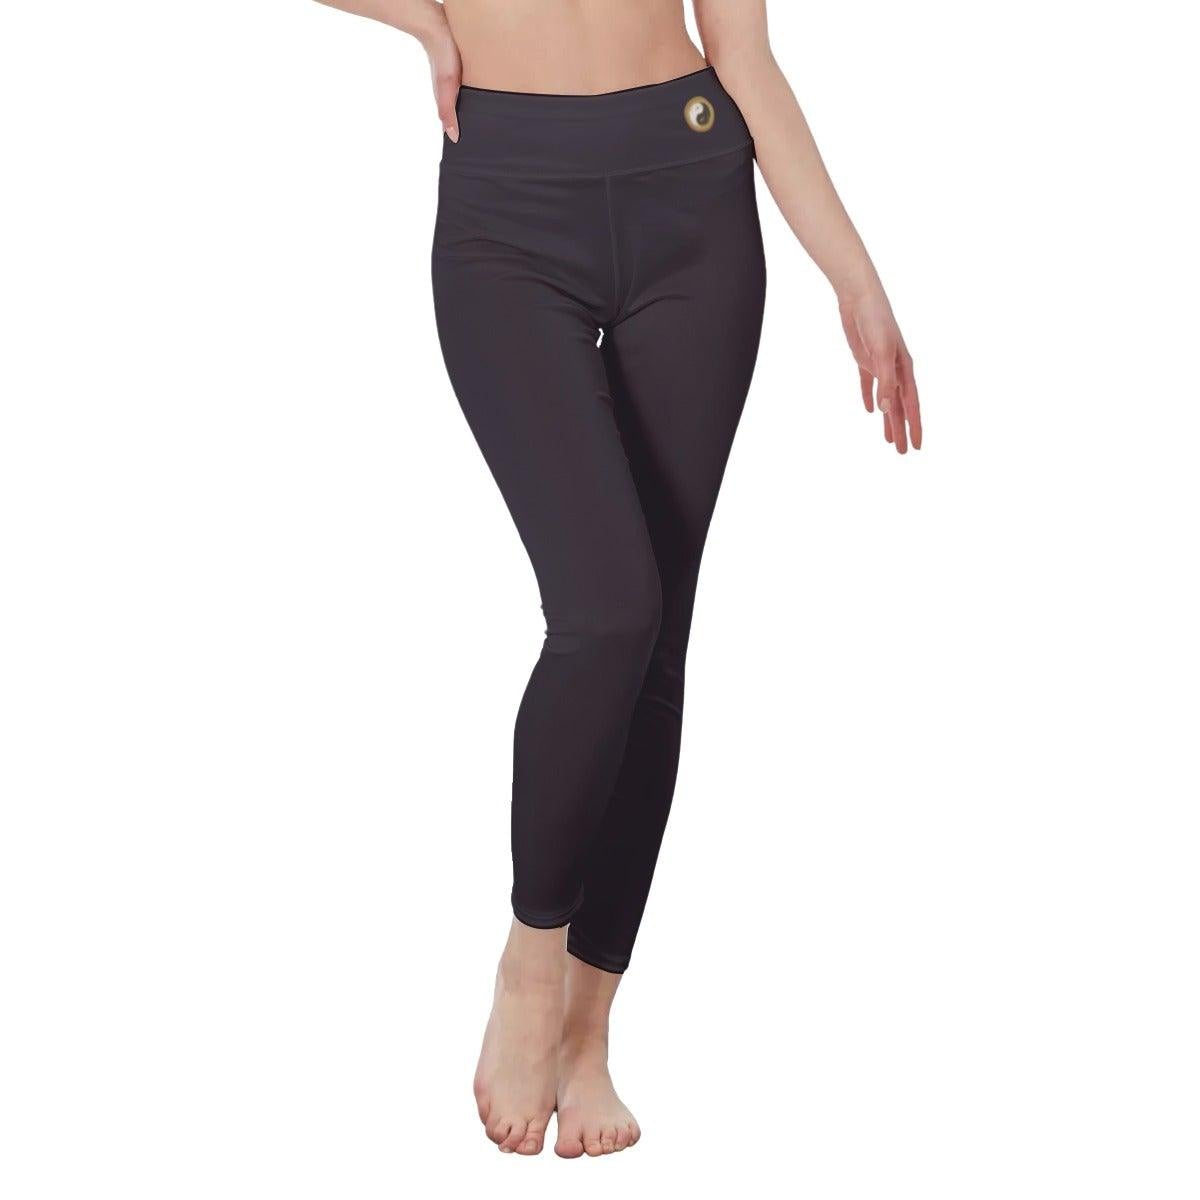 Comfy Women's High Waist Yoga Leggings | Side Stitch Closure - Gray - Personal Hour for Yoga and Meditations 